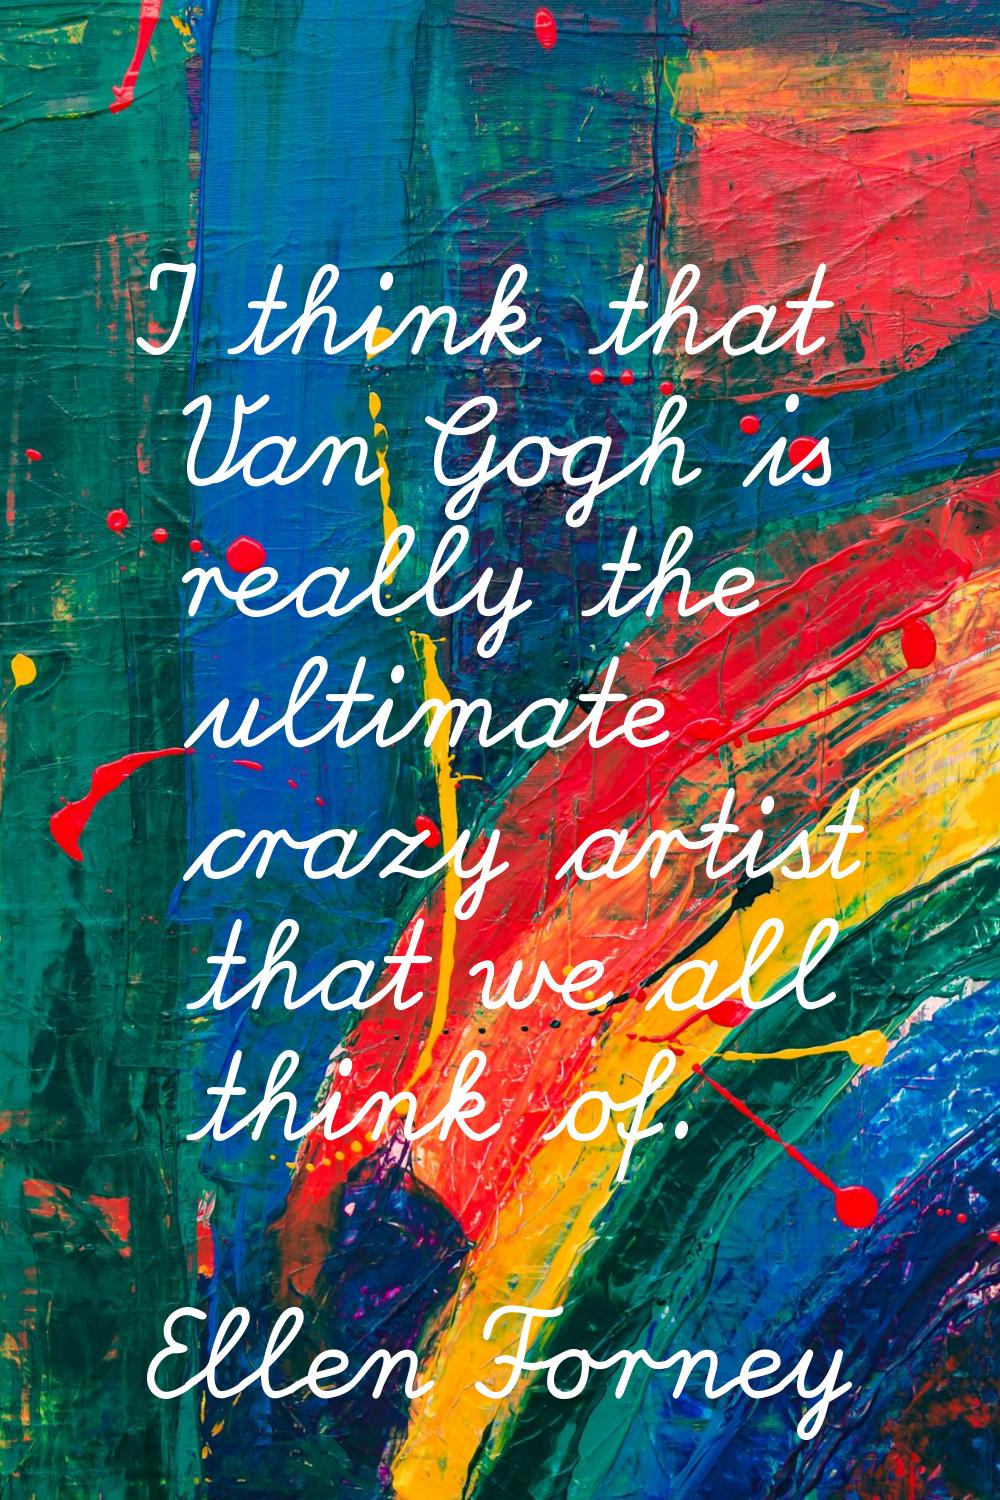 I think that Van Gogh is really the ultimate crazy artist that we all think of.